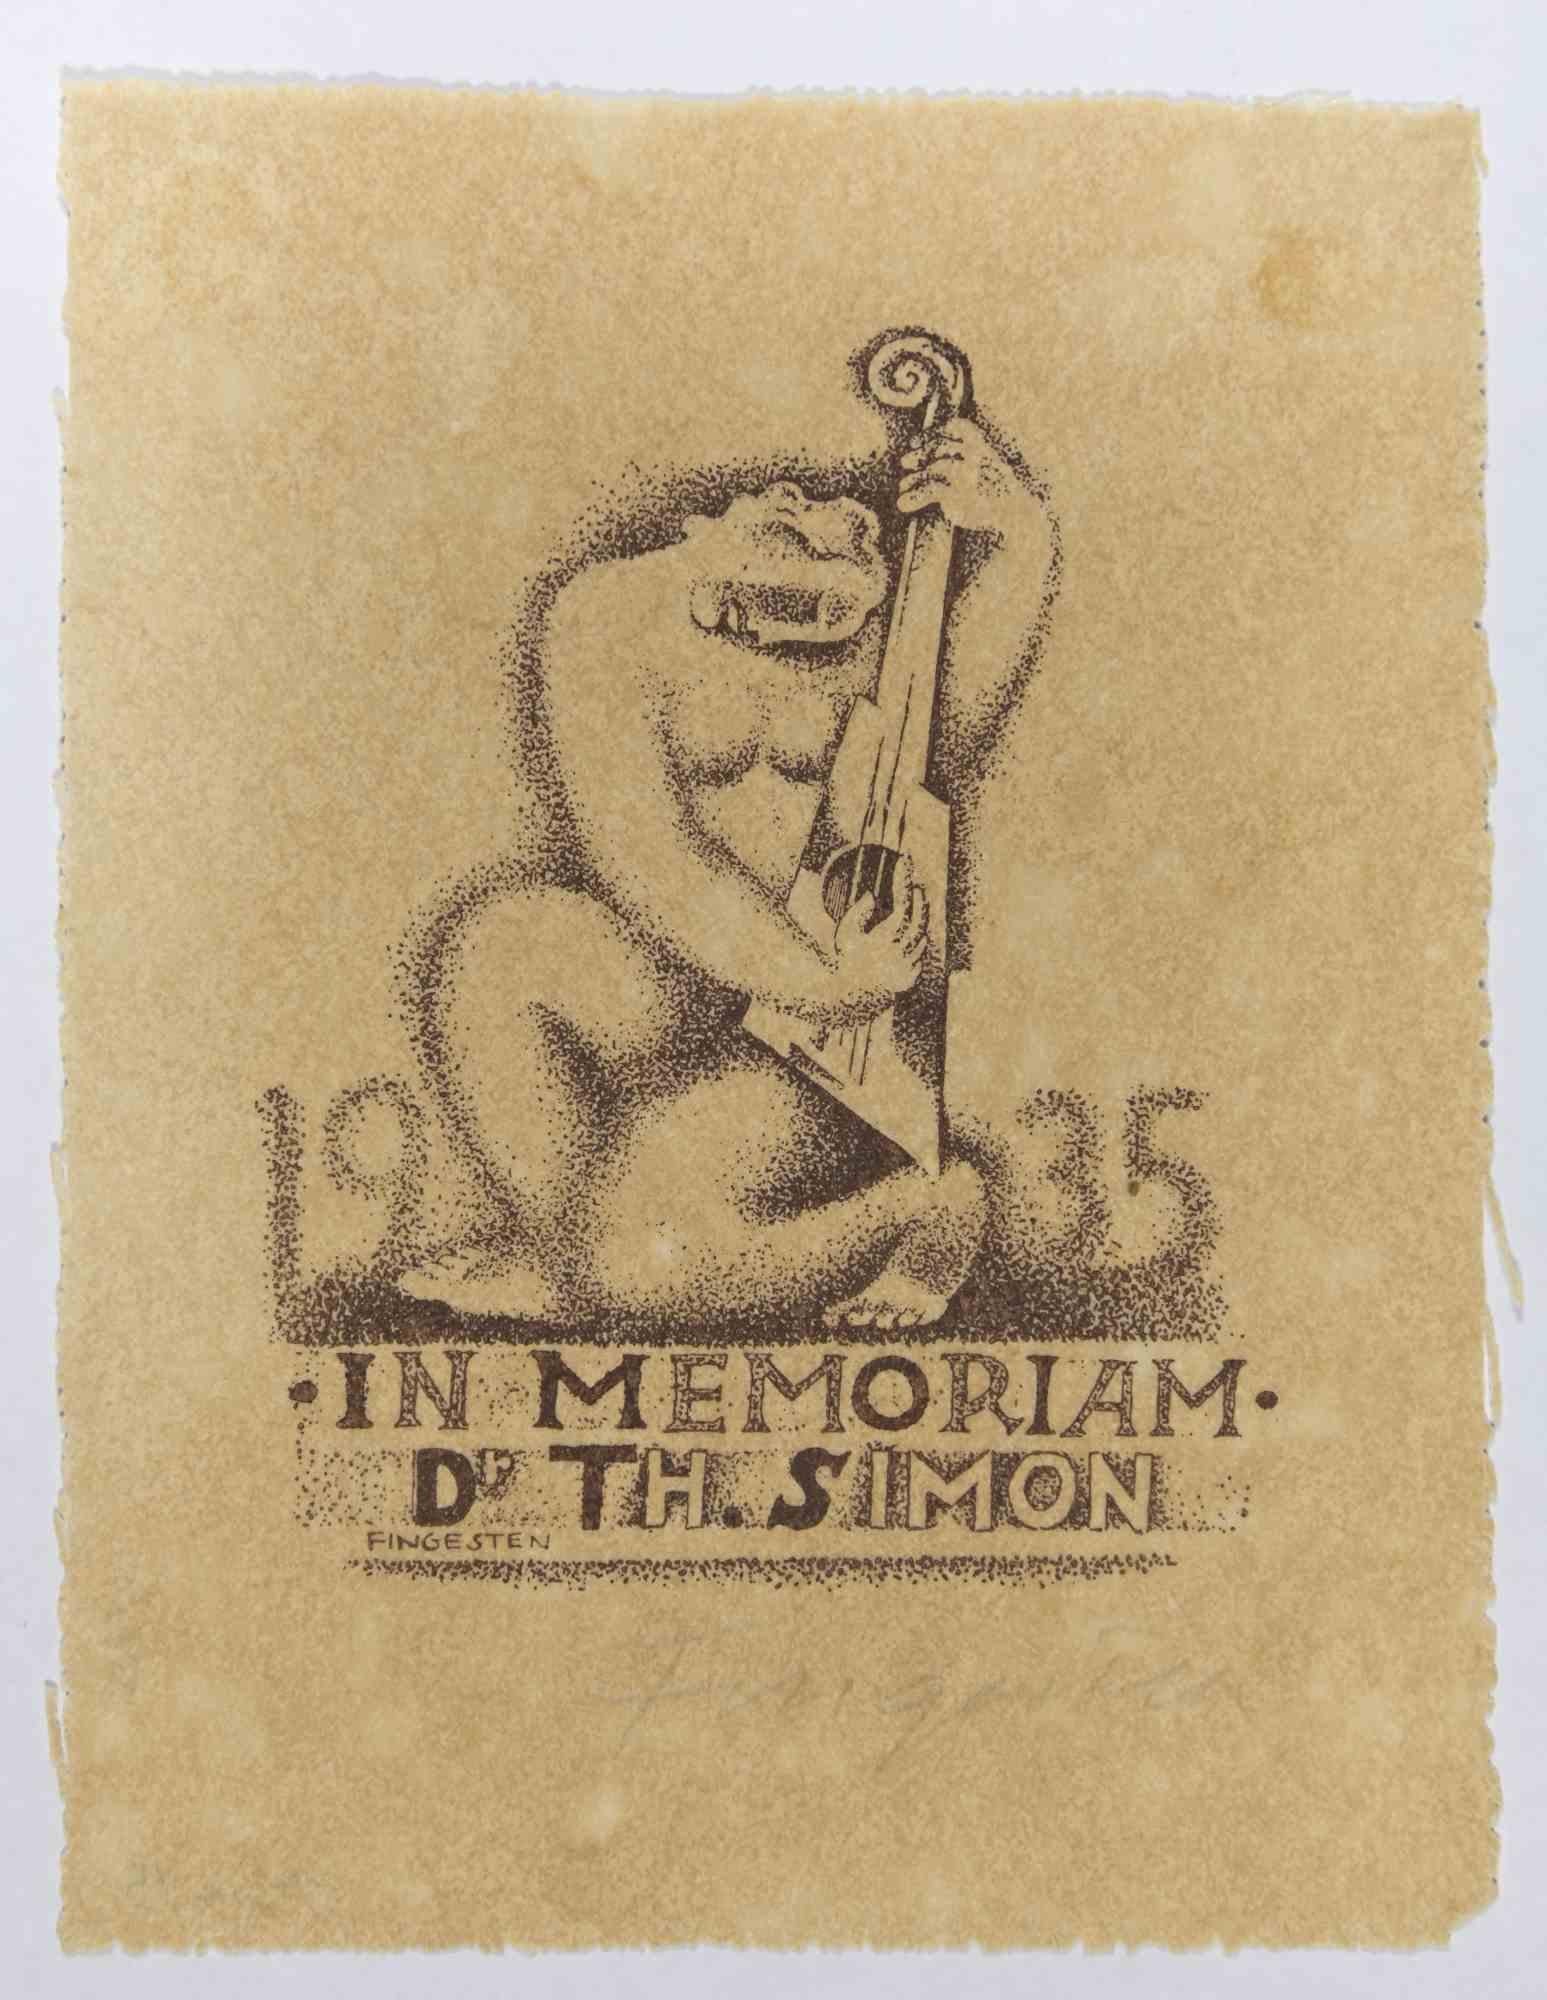 Ex Libris - In Memoriam Dr. Th. Simon is a woodcut print created by  Michel Fingesten in 1935.

Hand signed on the lower margin.

Good conditions.

Michel Fingesten (1884 - 1943) was a Czech painter and engraver of Jewish origin. He is considered